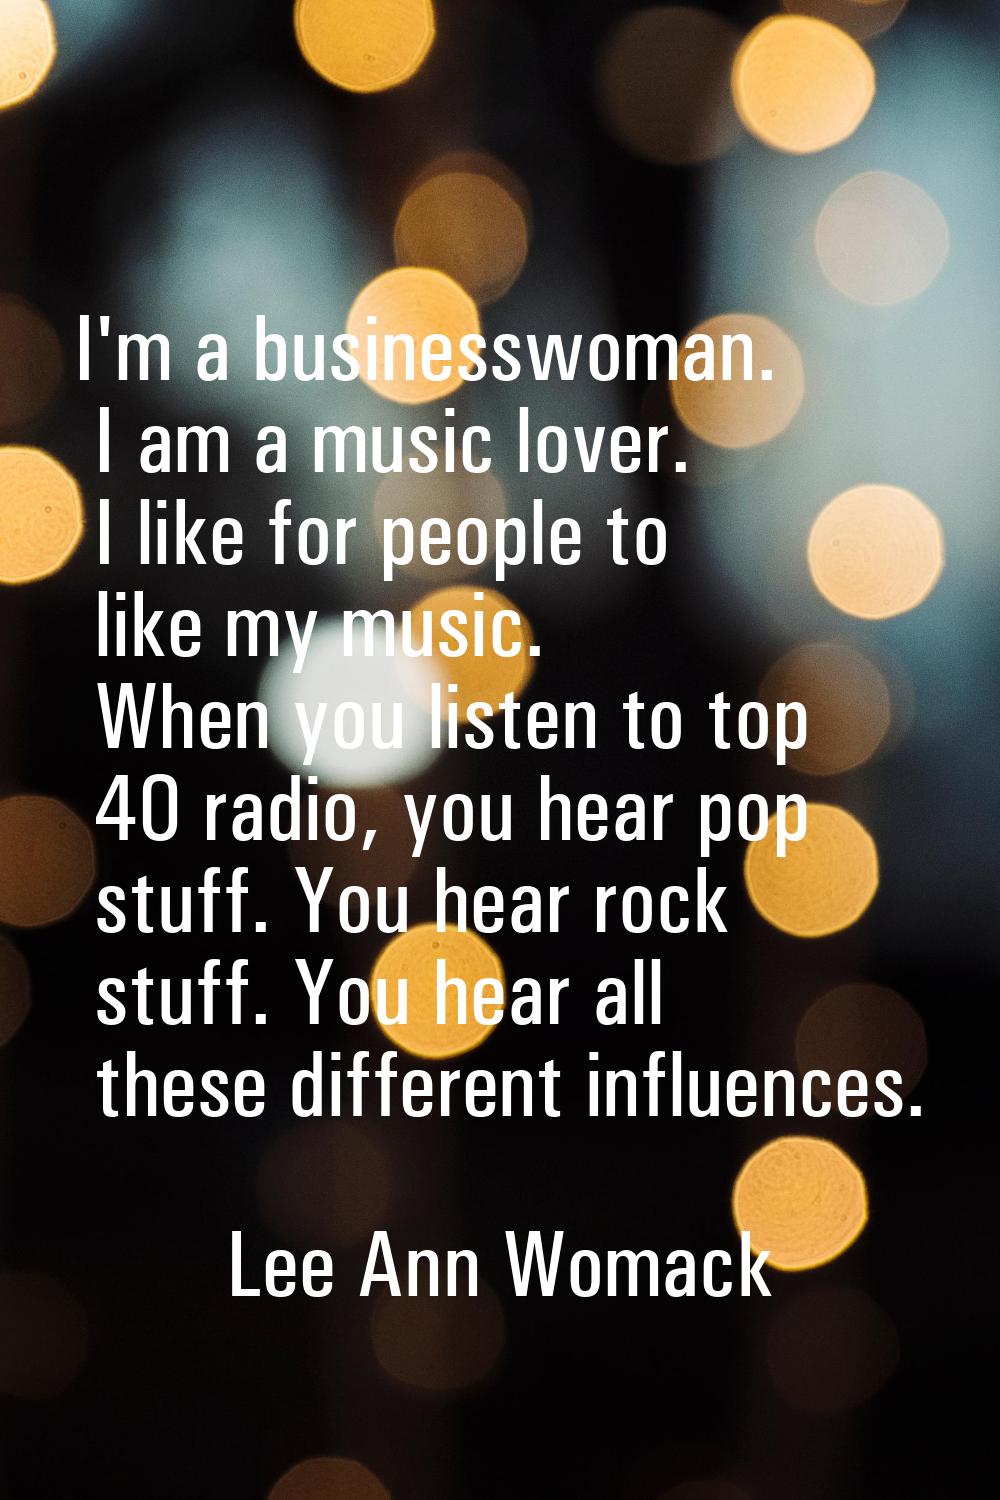 I'm a businesswoman. I am a music lover. I like for people to like my music. When you listen to top